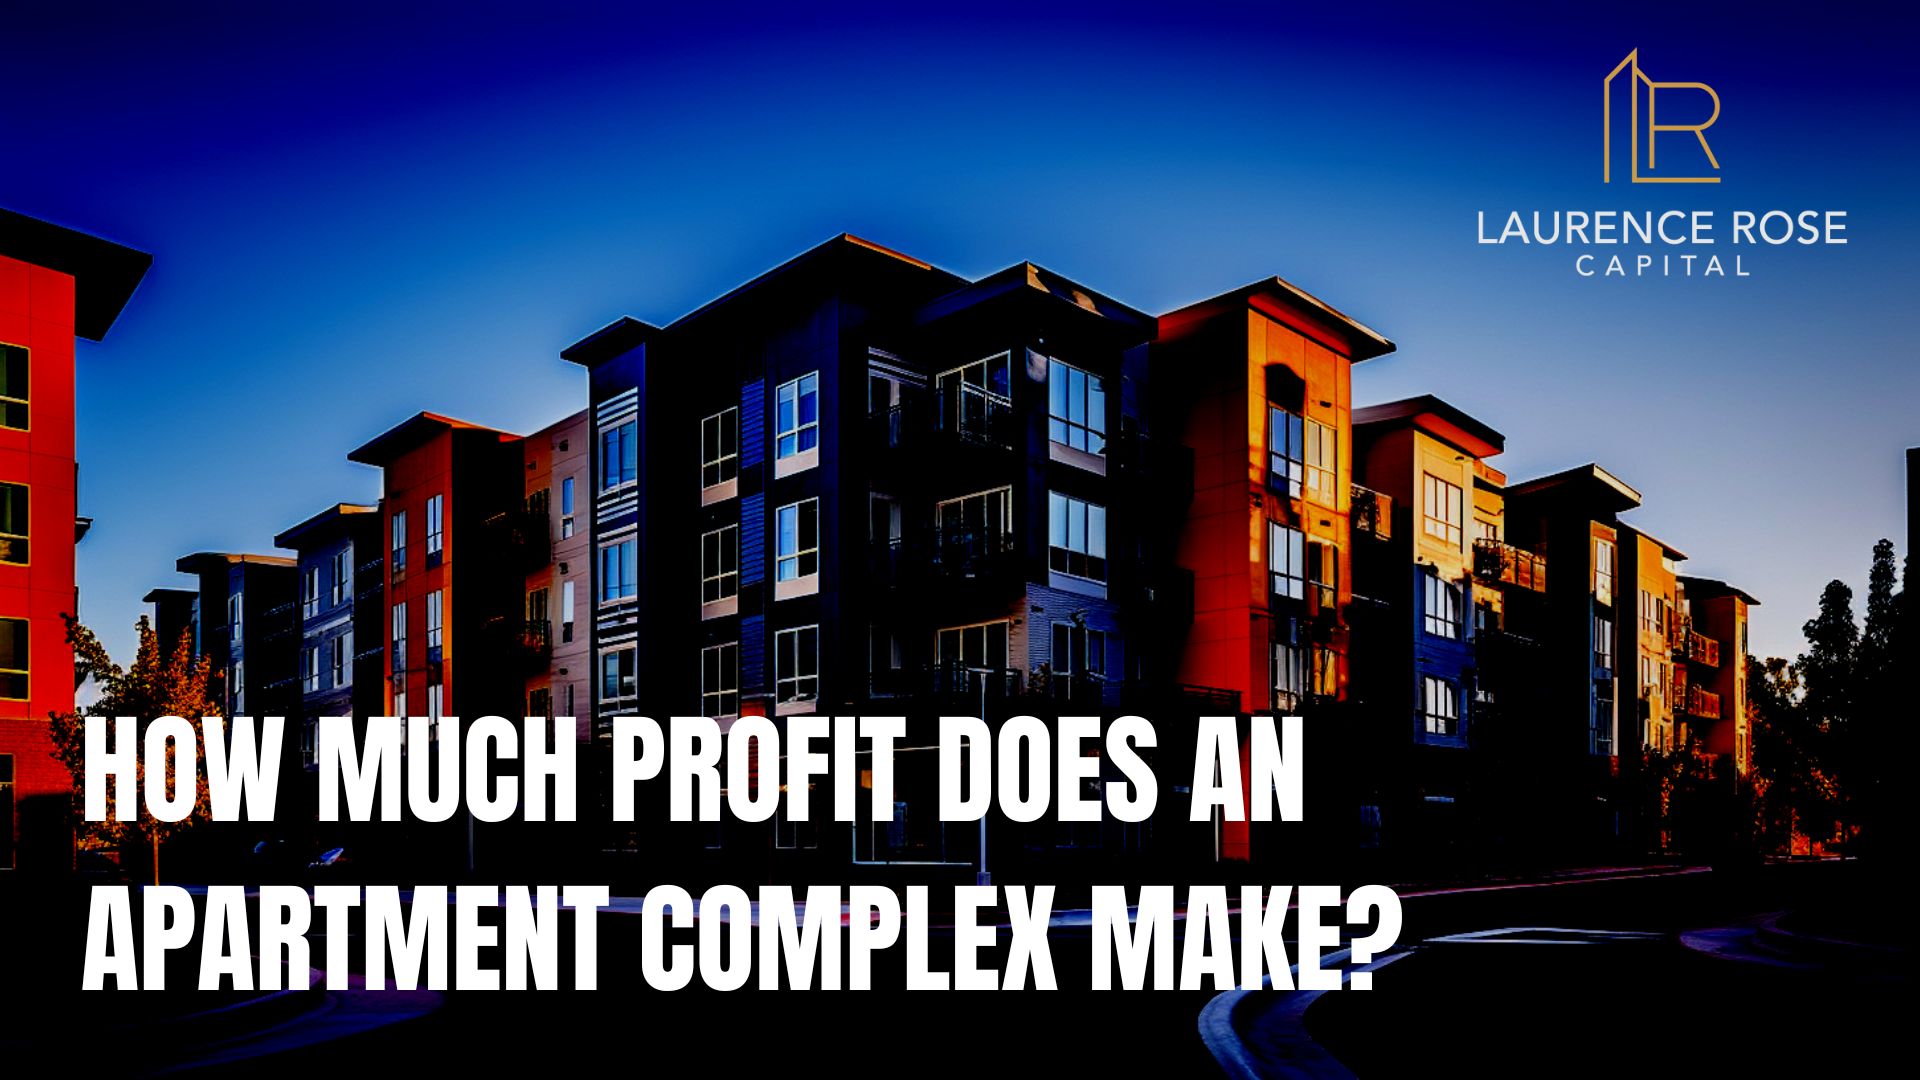 How much profit does an apartment complex make?